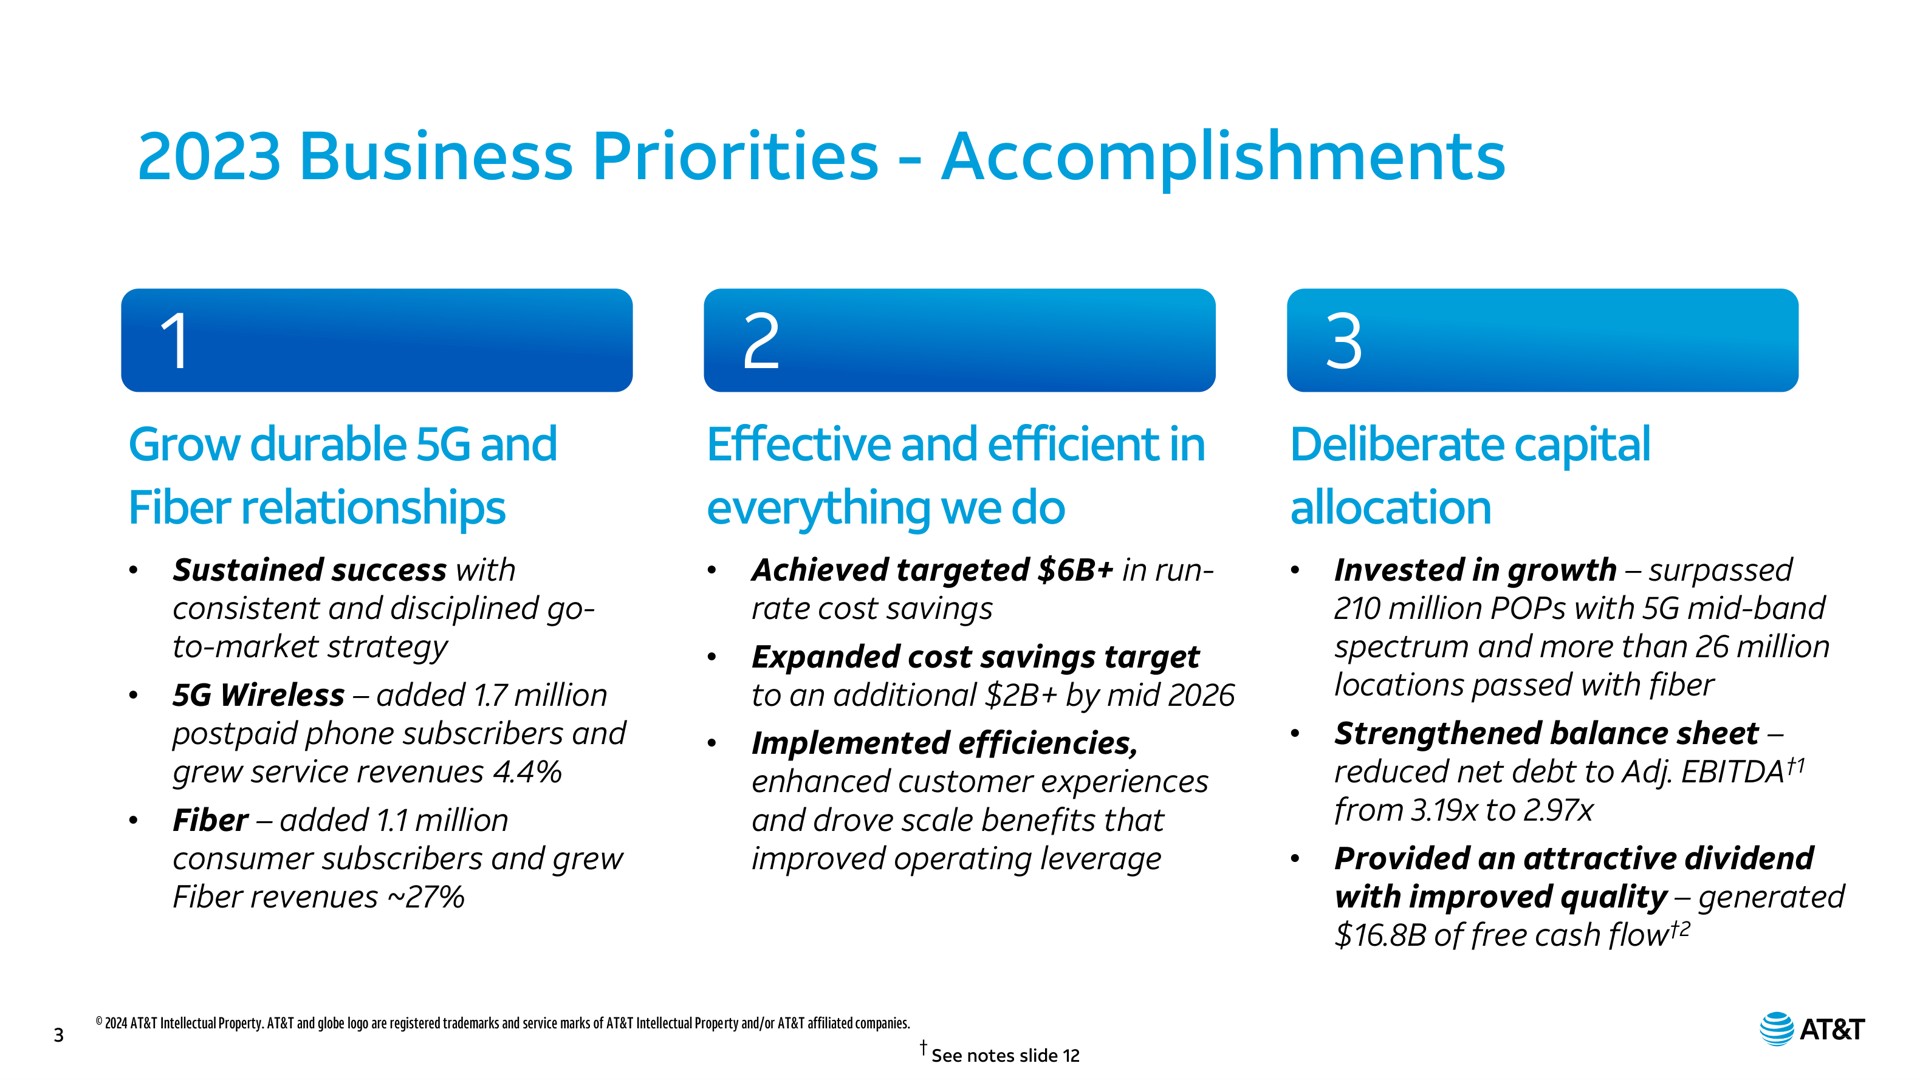 business priorities accomplishments grow durable and fiber relationships sustained success with consistent and disciplined go to market strategy wireless added million postpaid phone subscribers and grew service revenues fiber added million consumer subscribers and grew fiber revenues effective and efficient in everything we do achieved targeted in run rate cost savings expanded cost savings target to an additional by mid implemented efficiencies enhanced customer experiences and drove scale benefits that improved operating leverage deliberate capital allocation invested in growth surpassed million pops with mid band spectrum and more than million locations passed with fiber strengthened balance sheet reduced net debt to from to provided an attractive dividend with improved quality generated of free cash flow at | AT&T